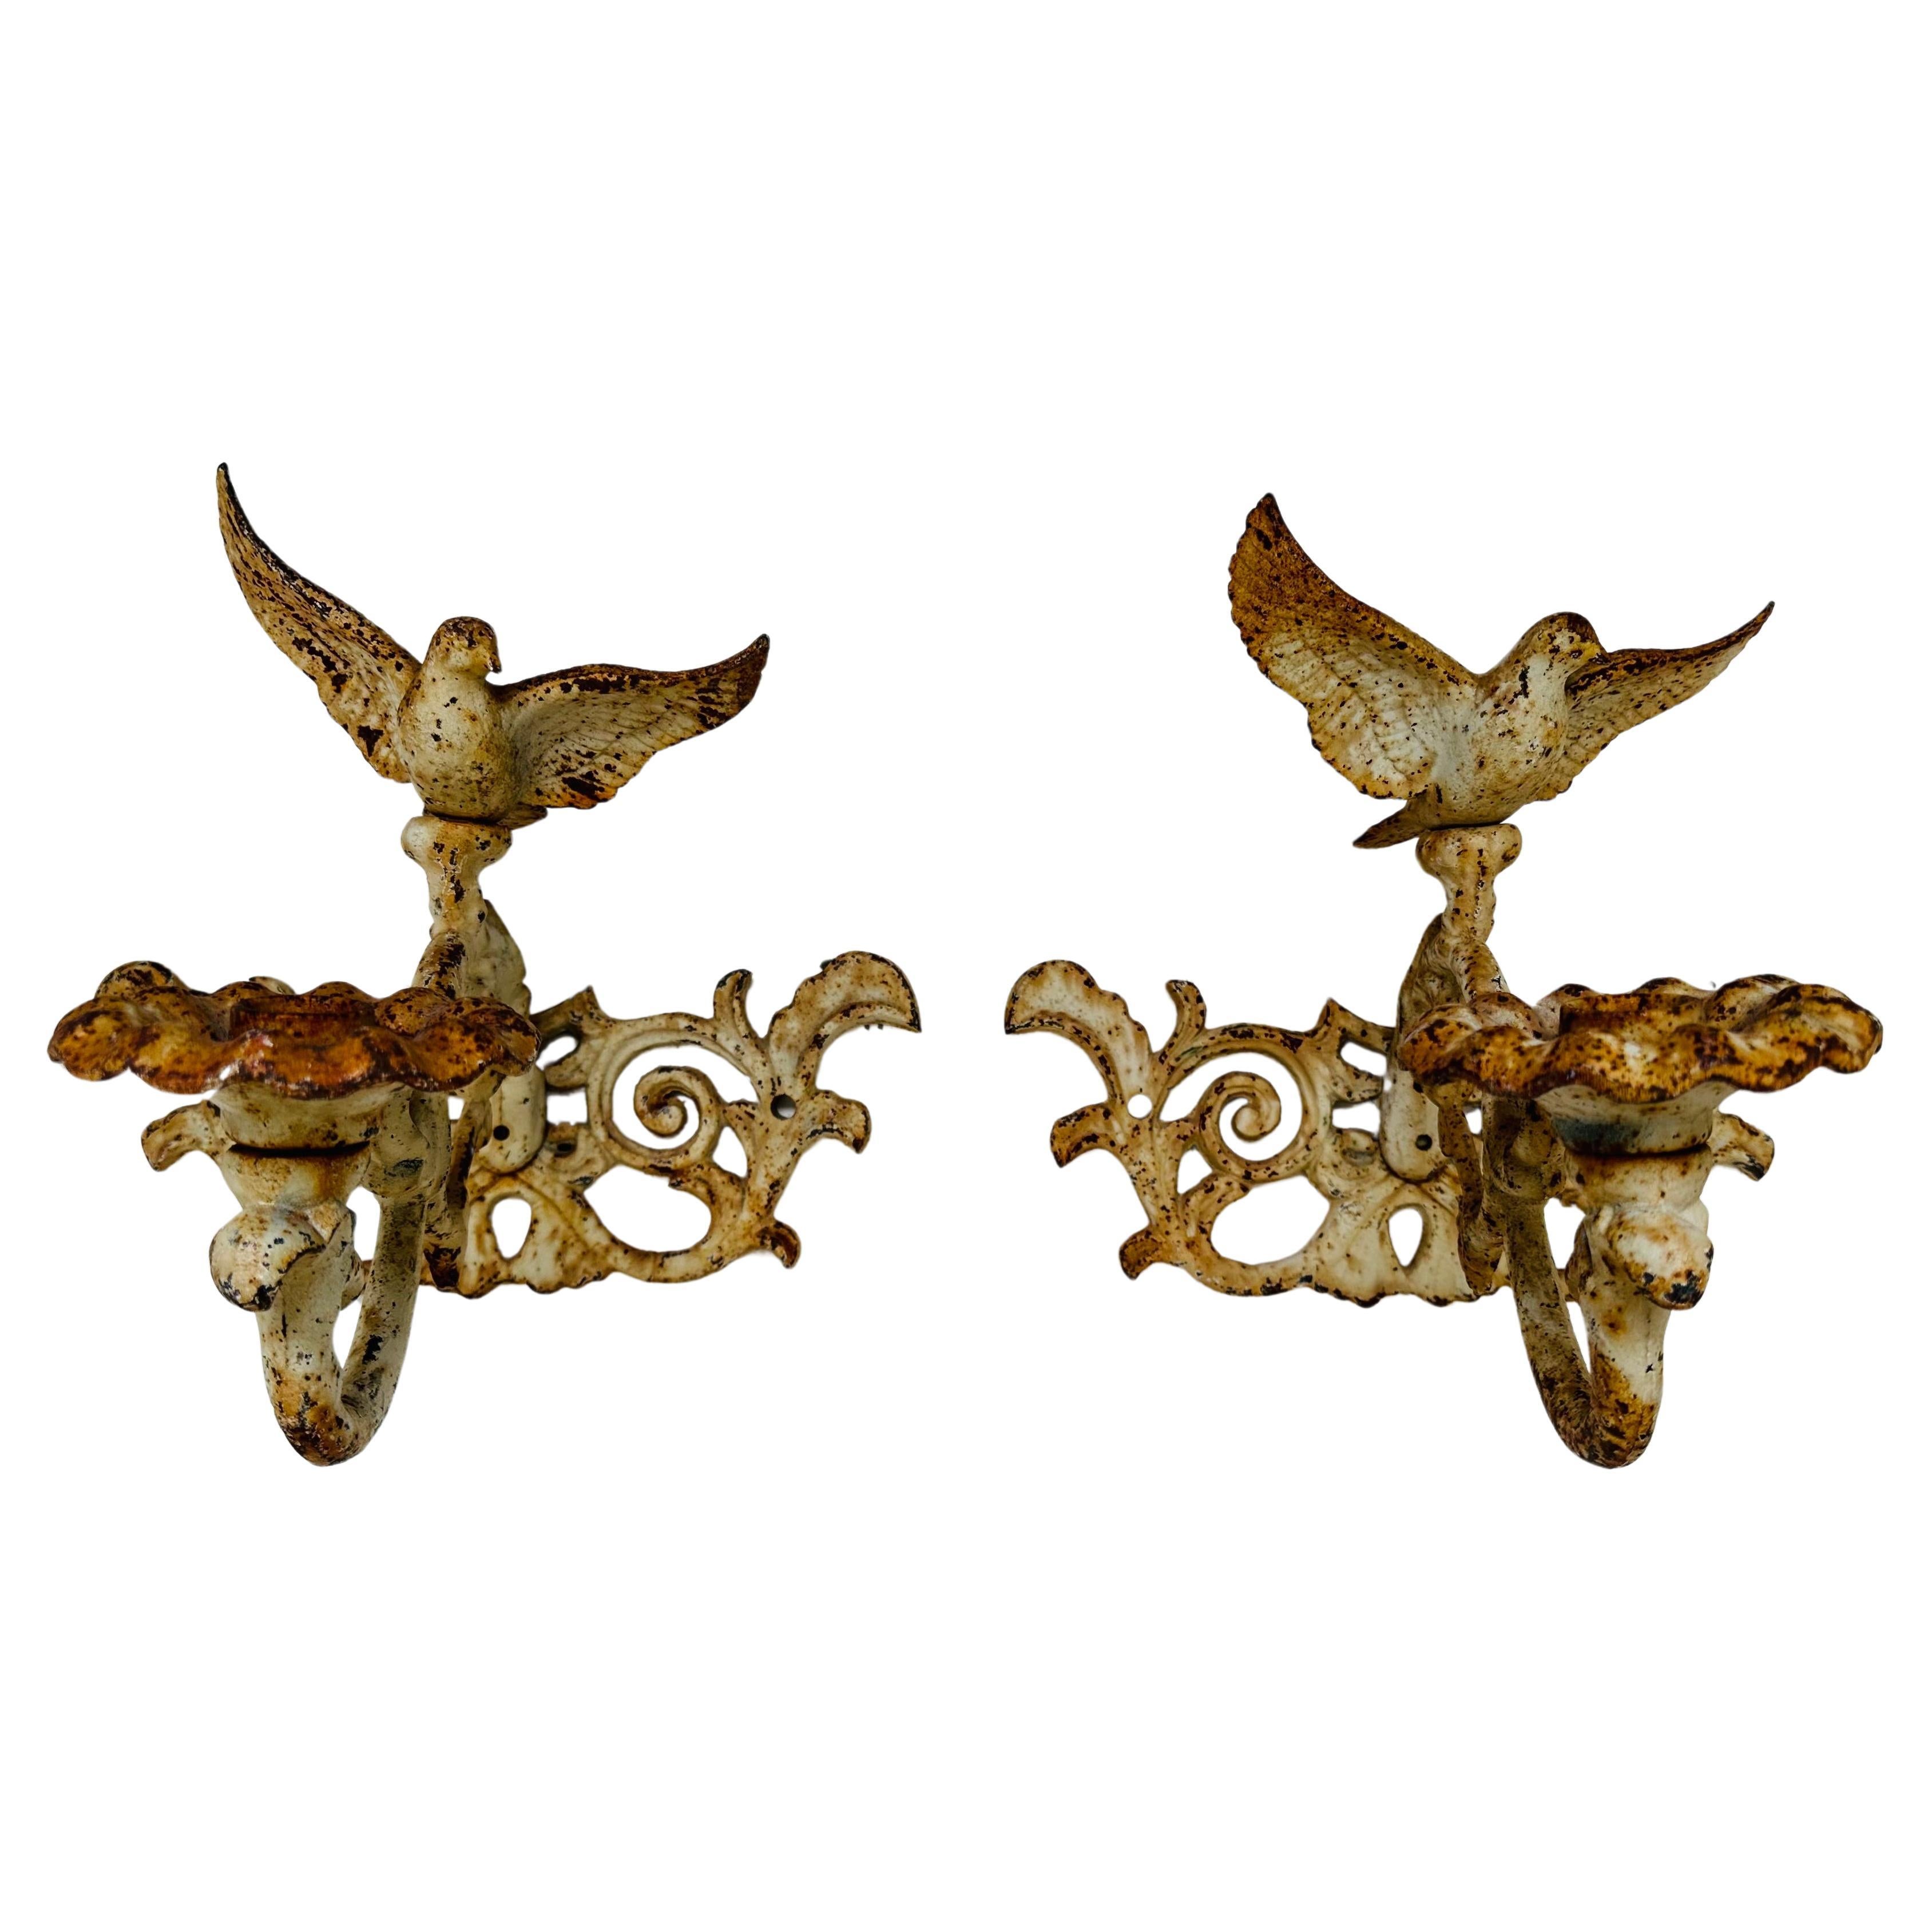 Pair of Circa 19th Century Cuban Cast Iron "Dove" Garden Rustic Candleholders For Sale